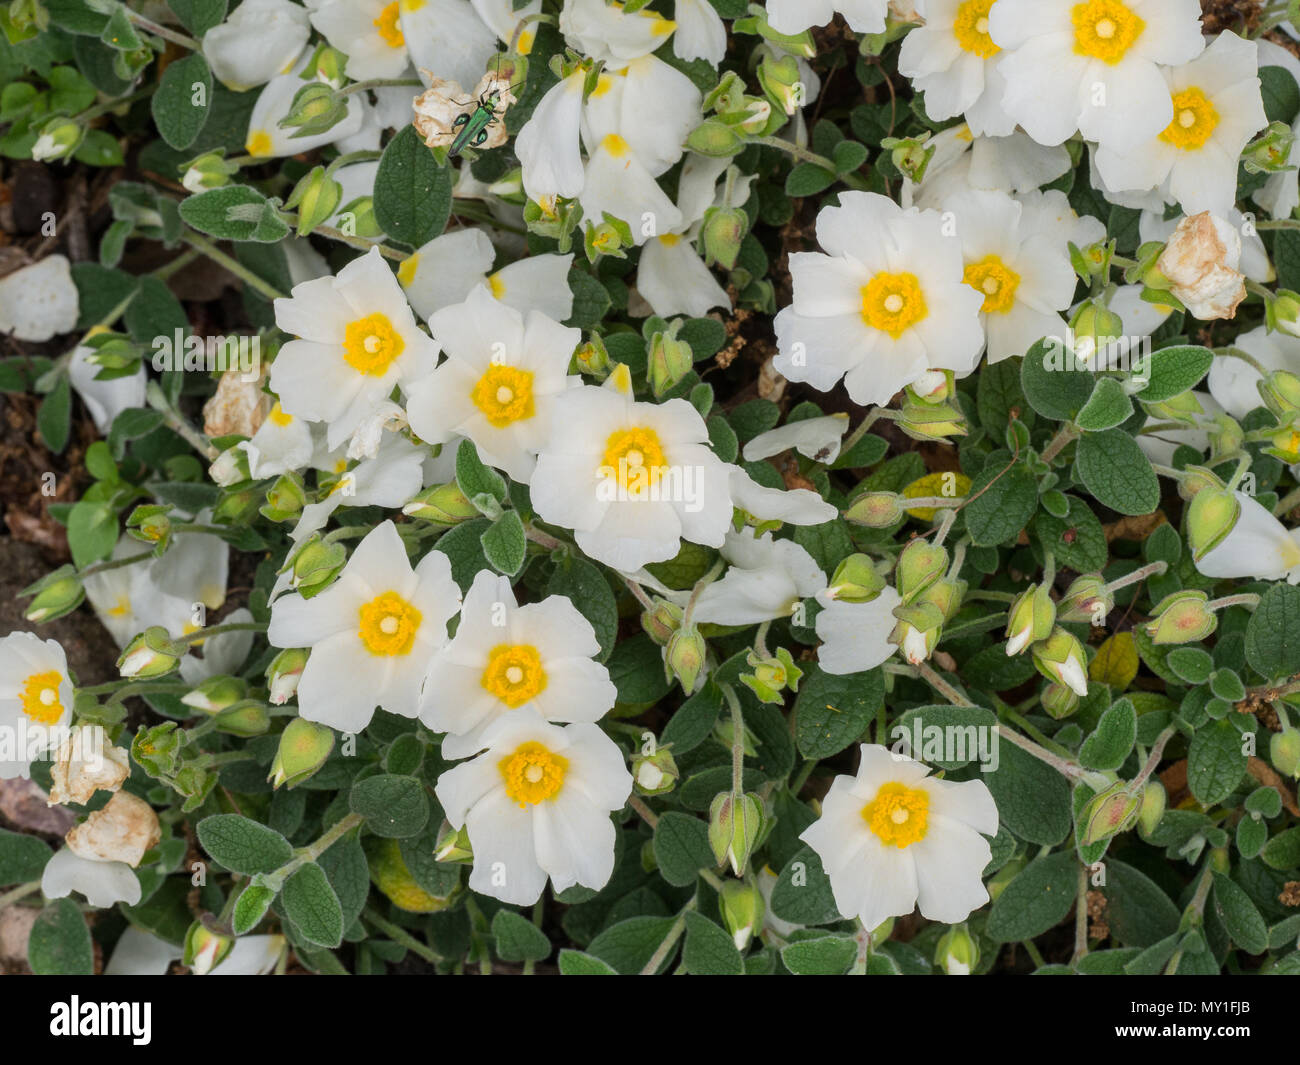 A plant of Cistus obtusifolius in flowers showing the buds and foliage Stock Photo